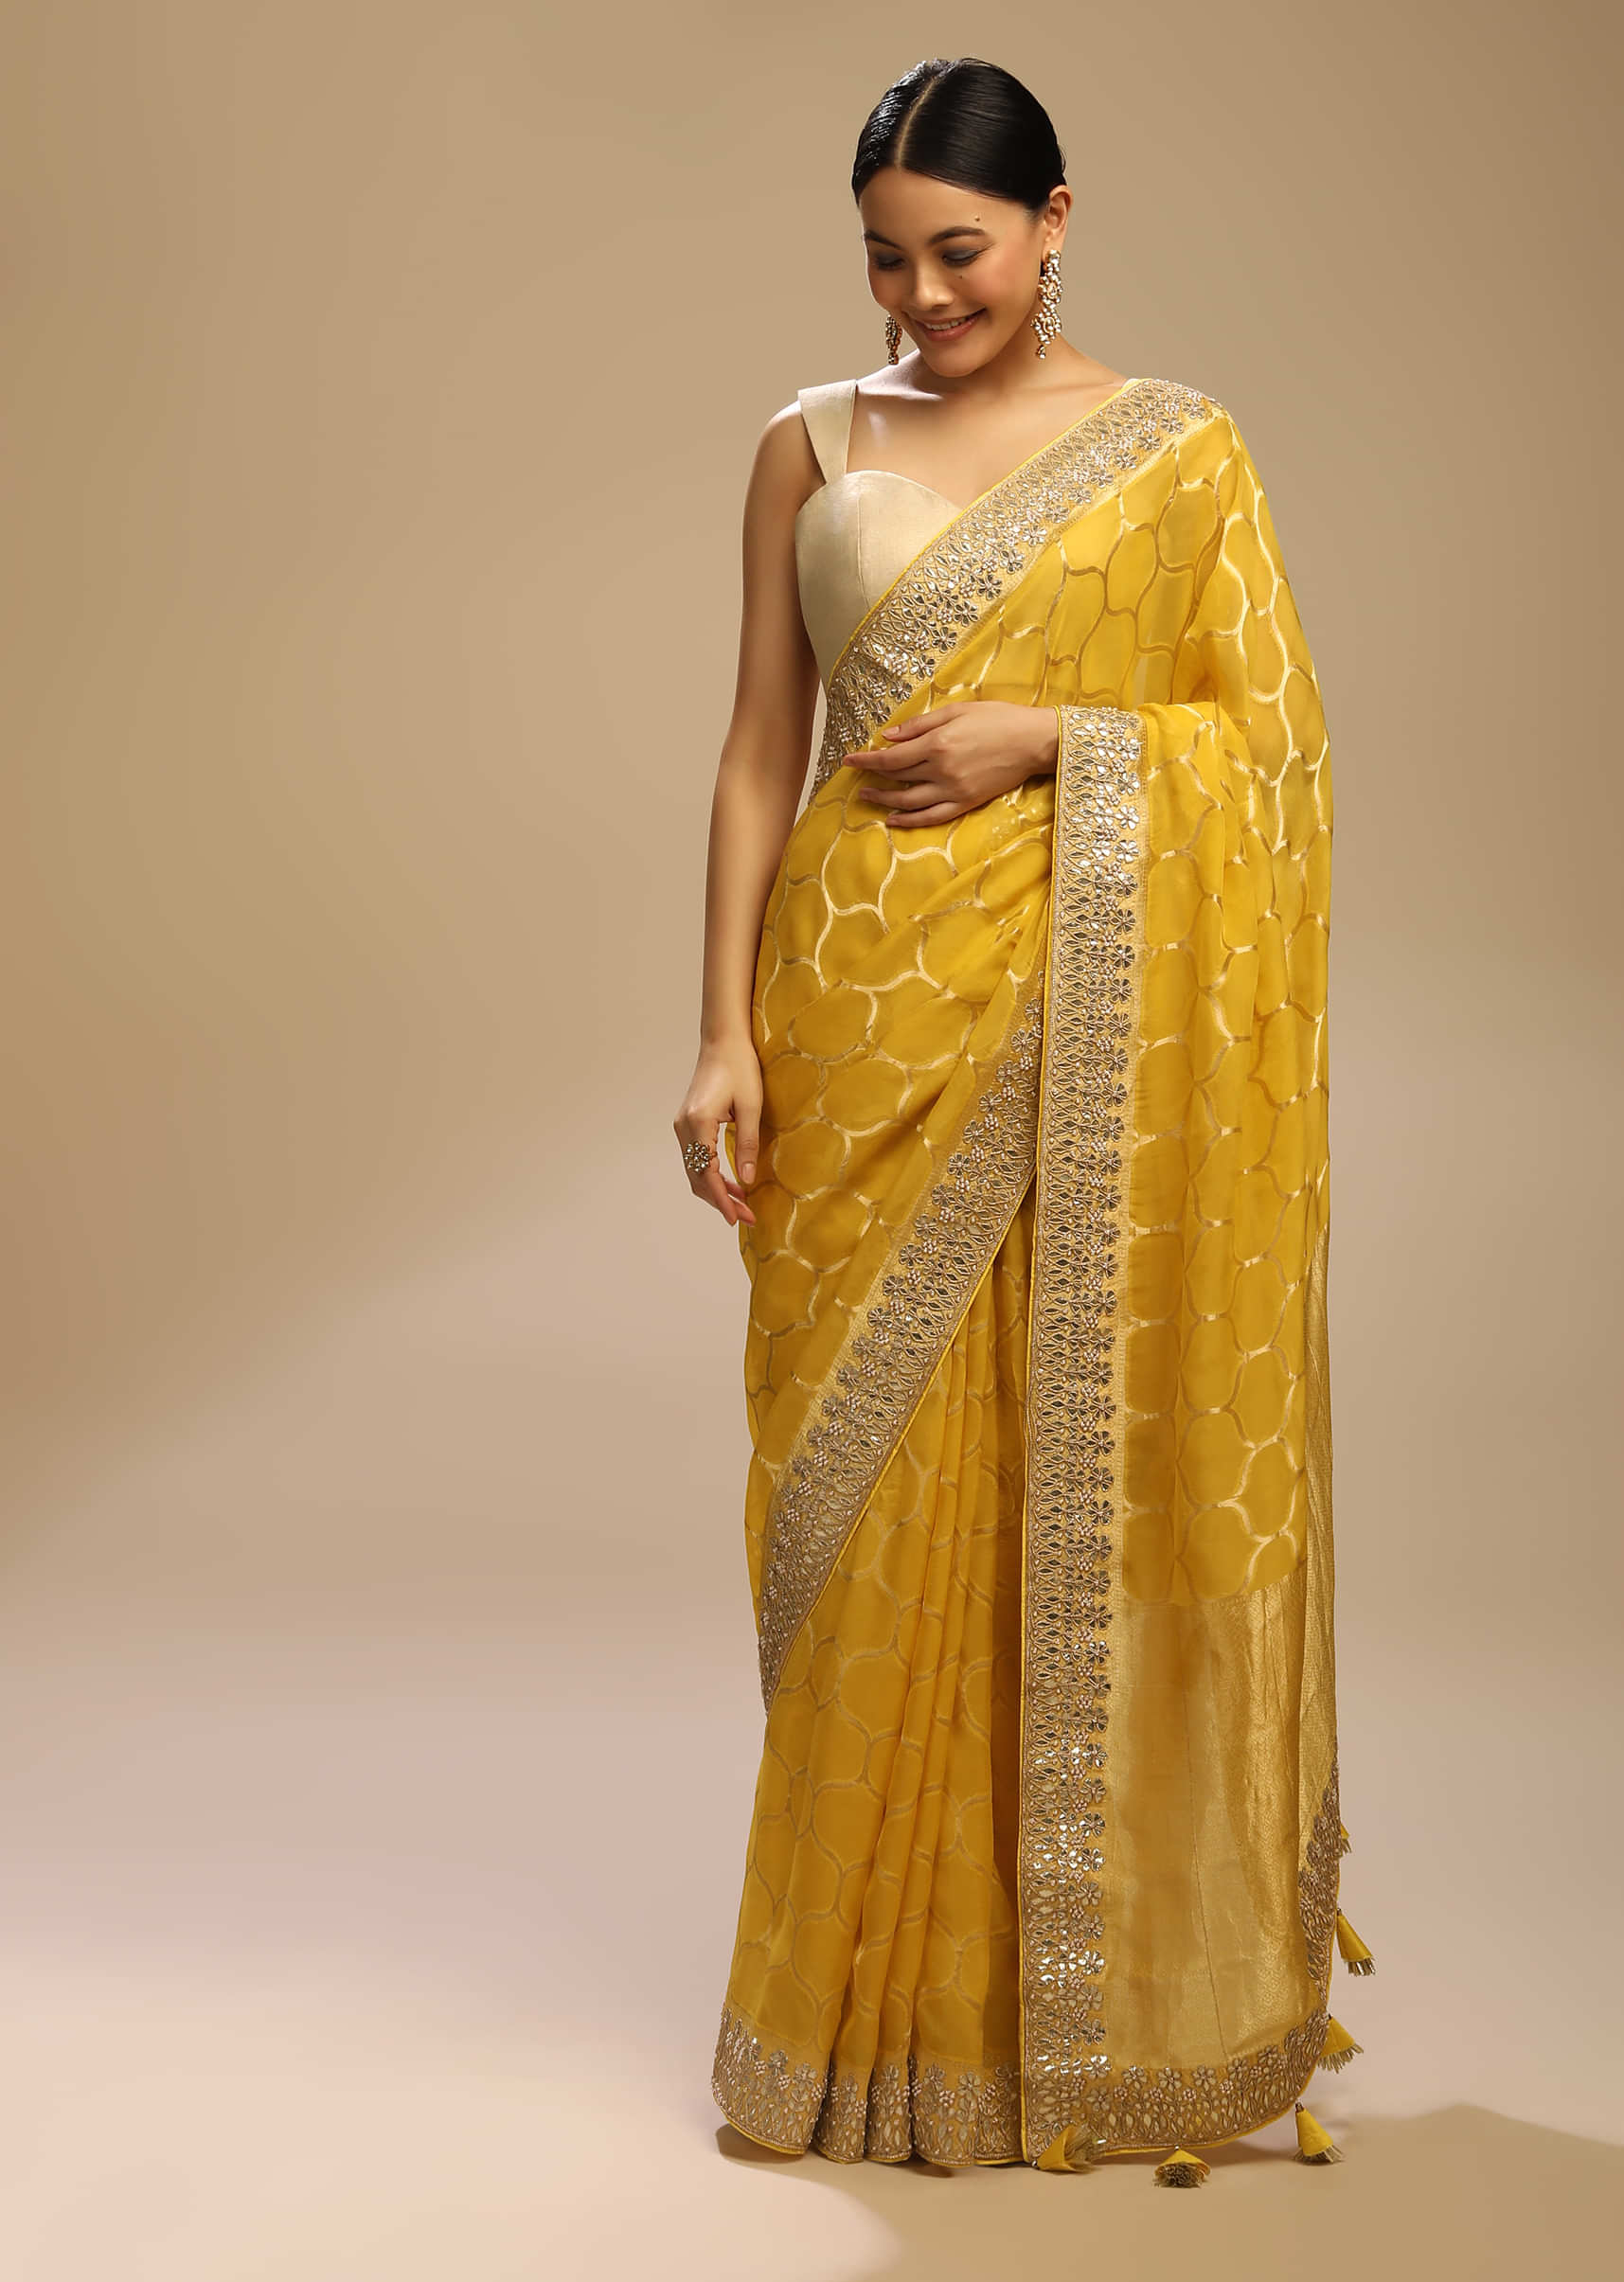 Mimosa Yellow Saree In Organza Silk With Woven Moroccan Jaal And Gotta Patti Embroidered Floral Border